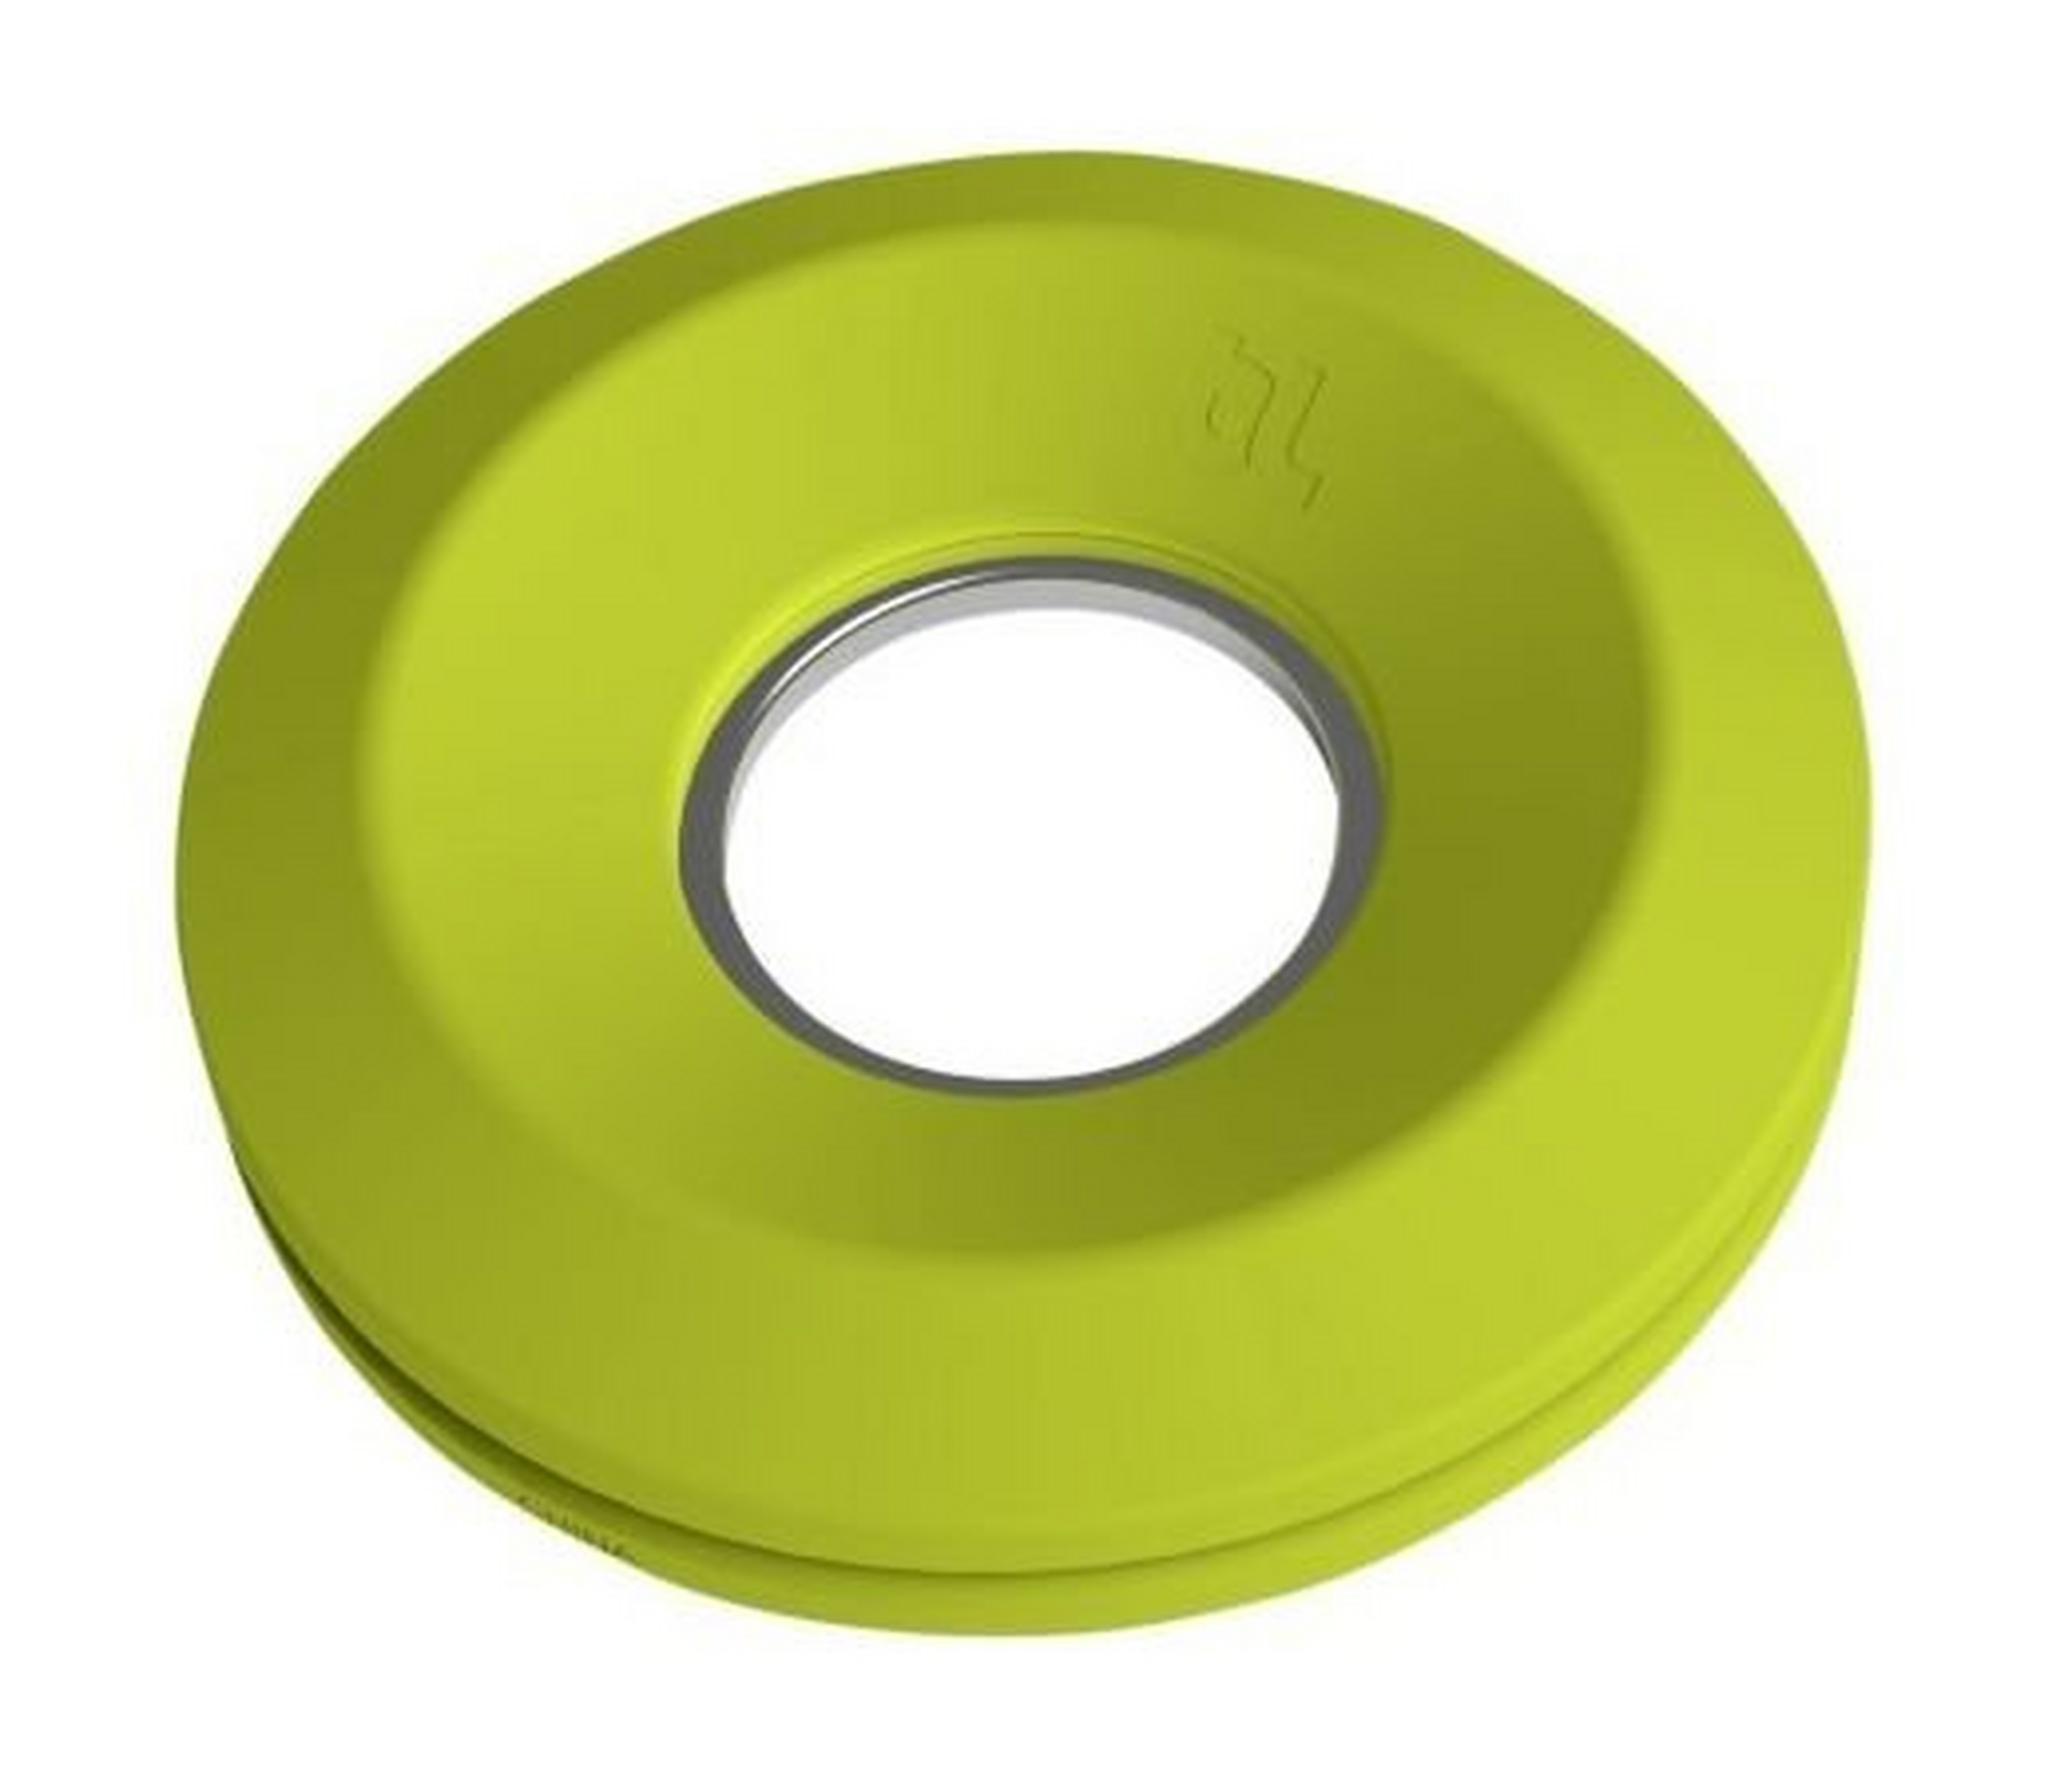 Bluelounge Cableyoyo Earbud Organizer - Lime Green